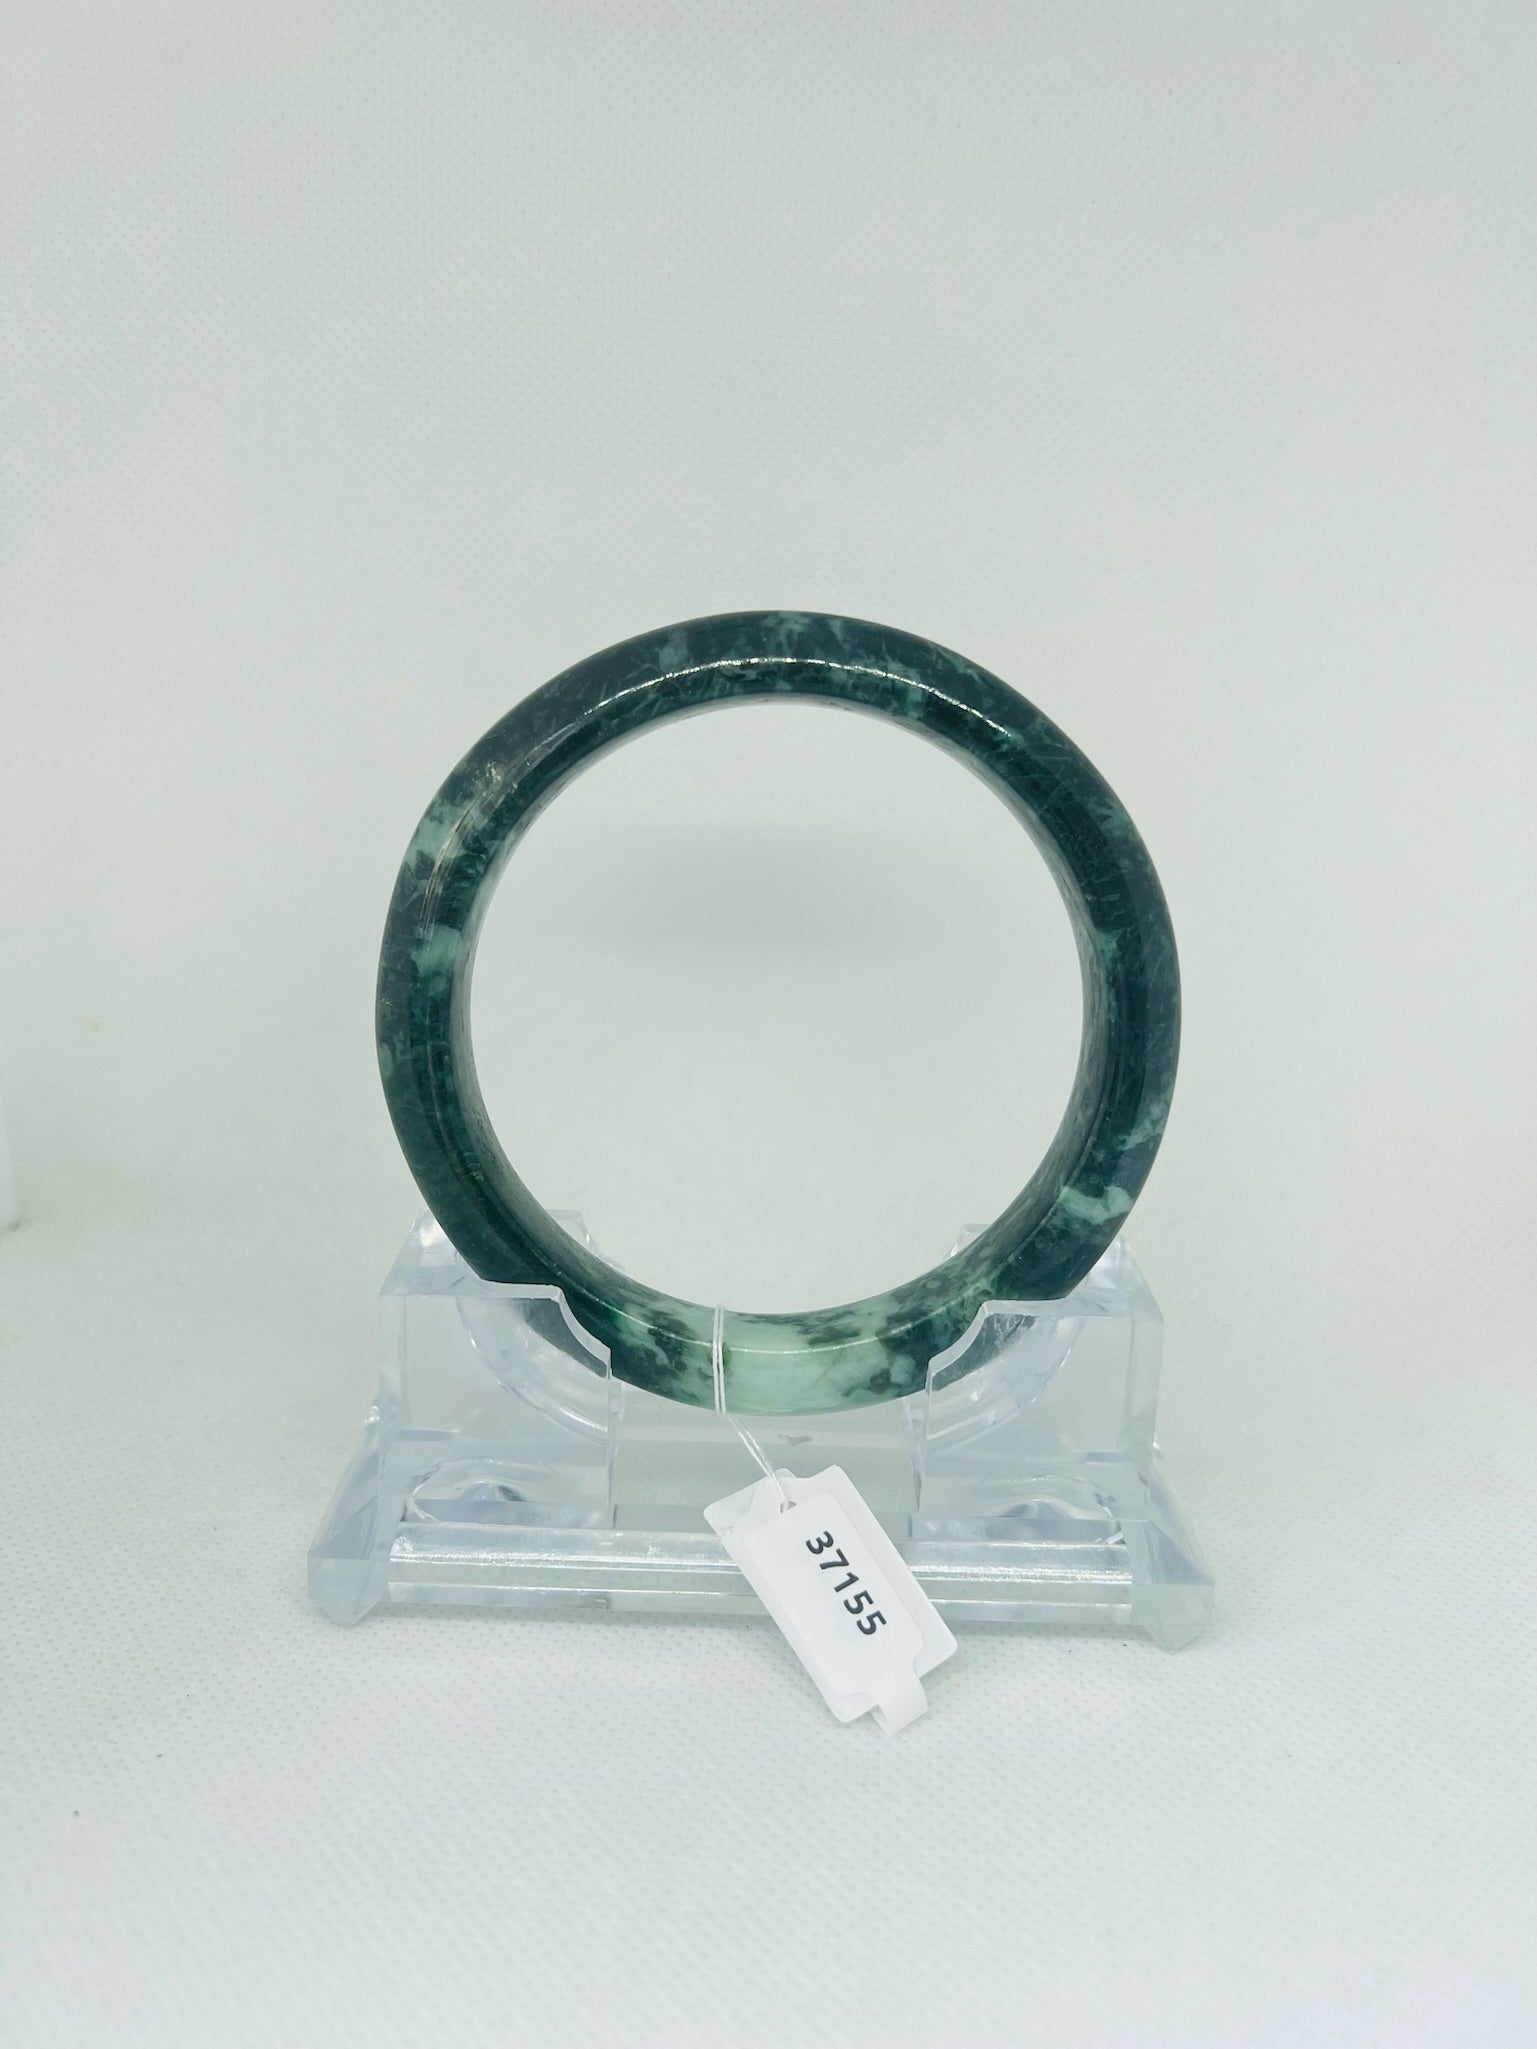 Grade A Natural Jade Bangle with certificate #37155